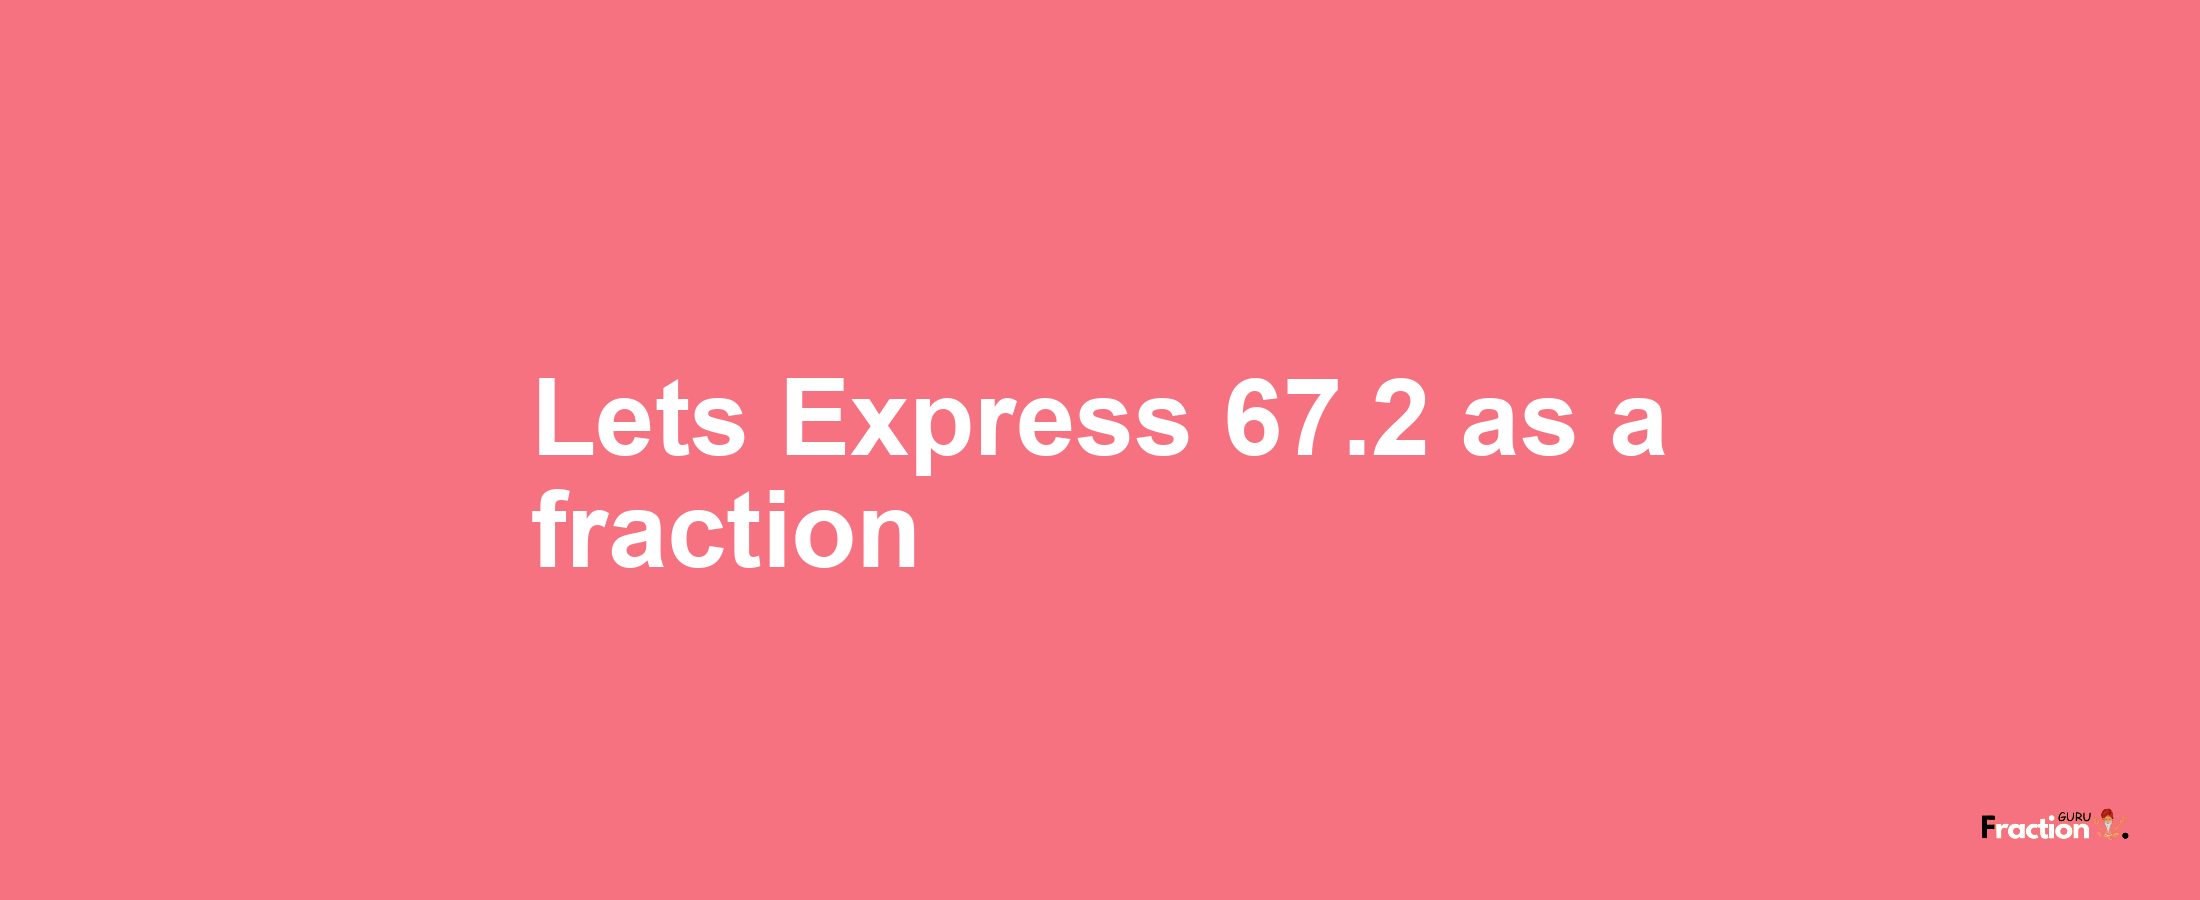 Lets Express 67.2 as afraction